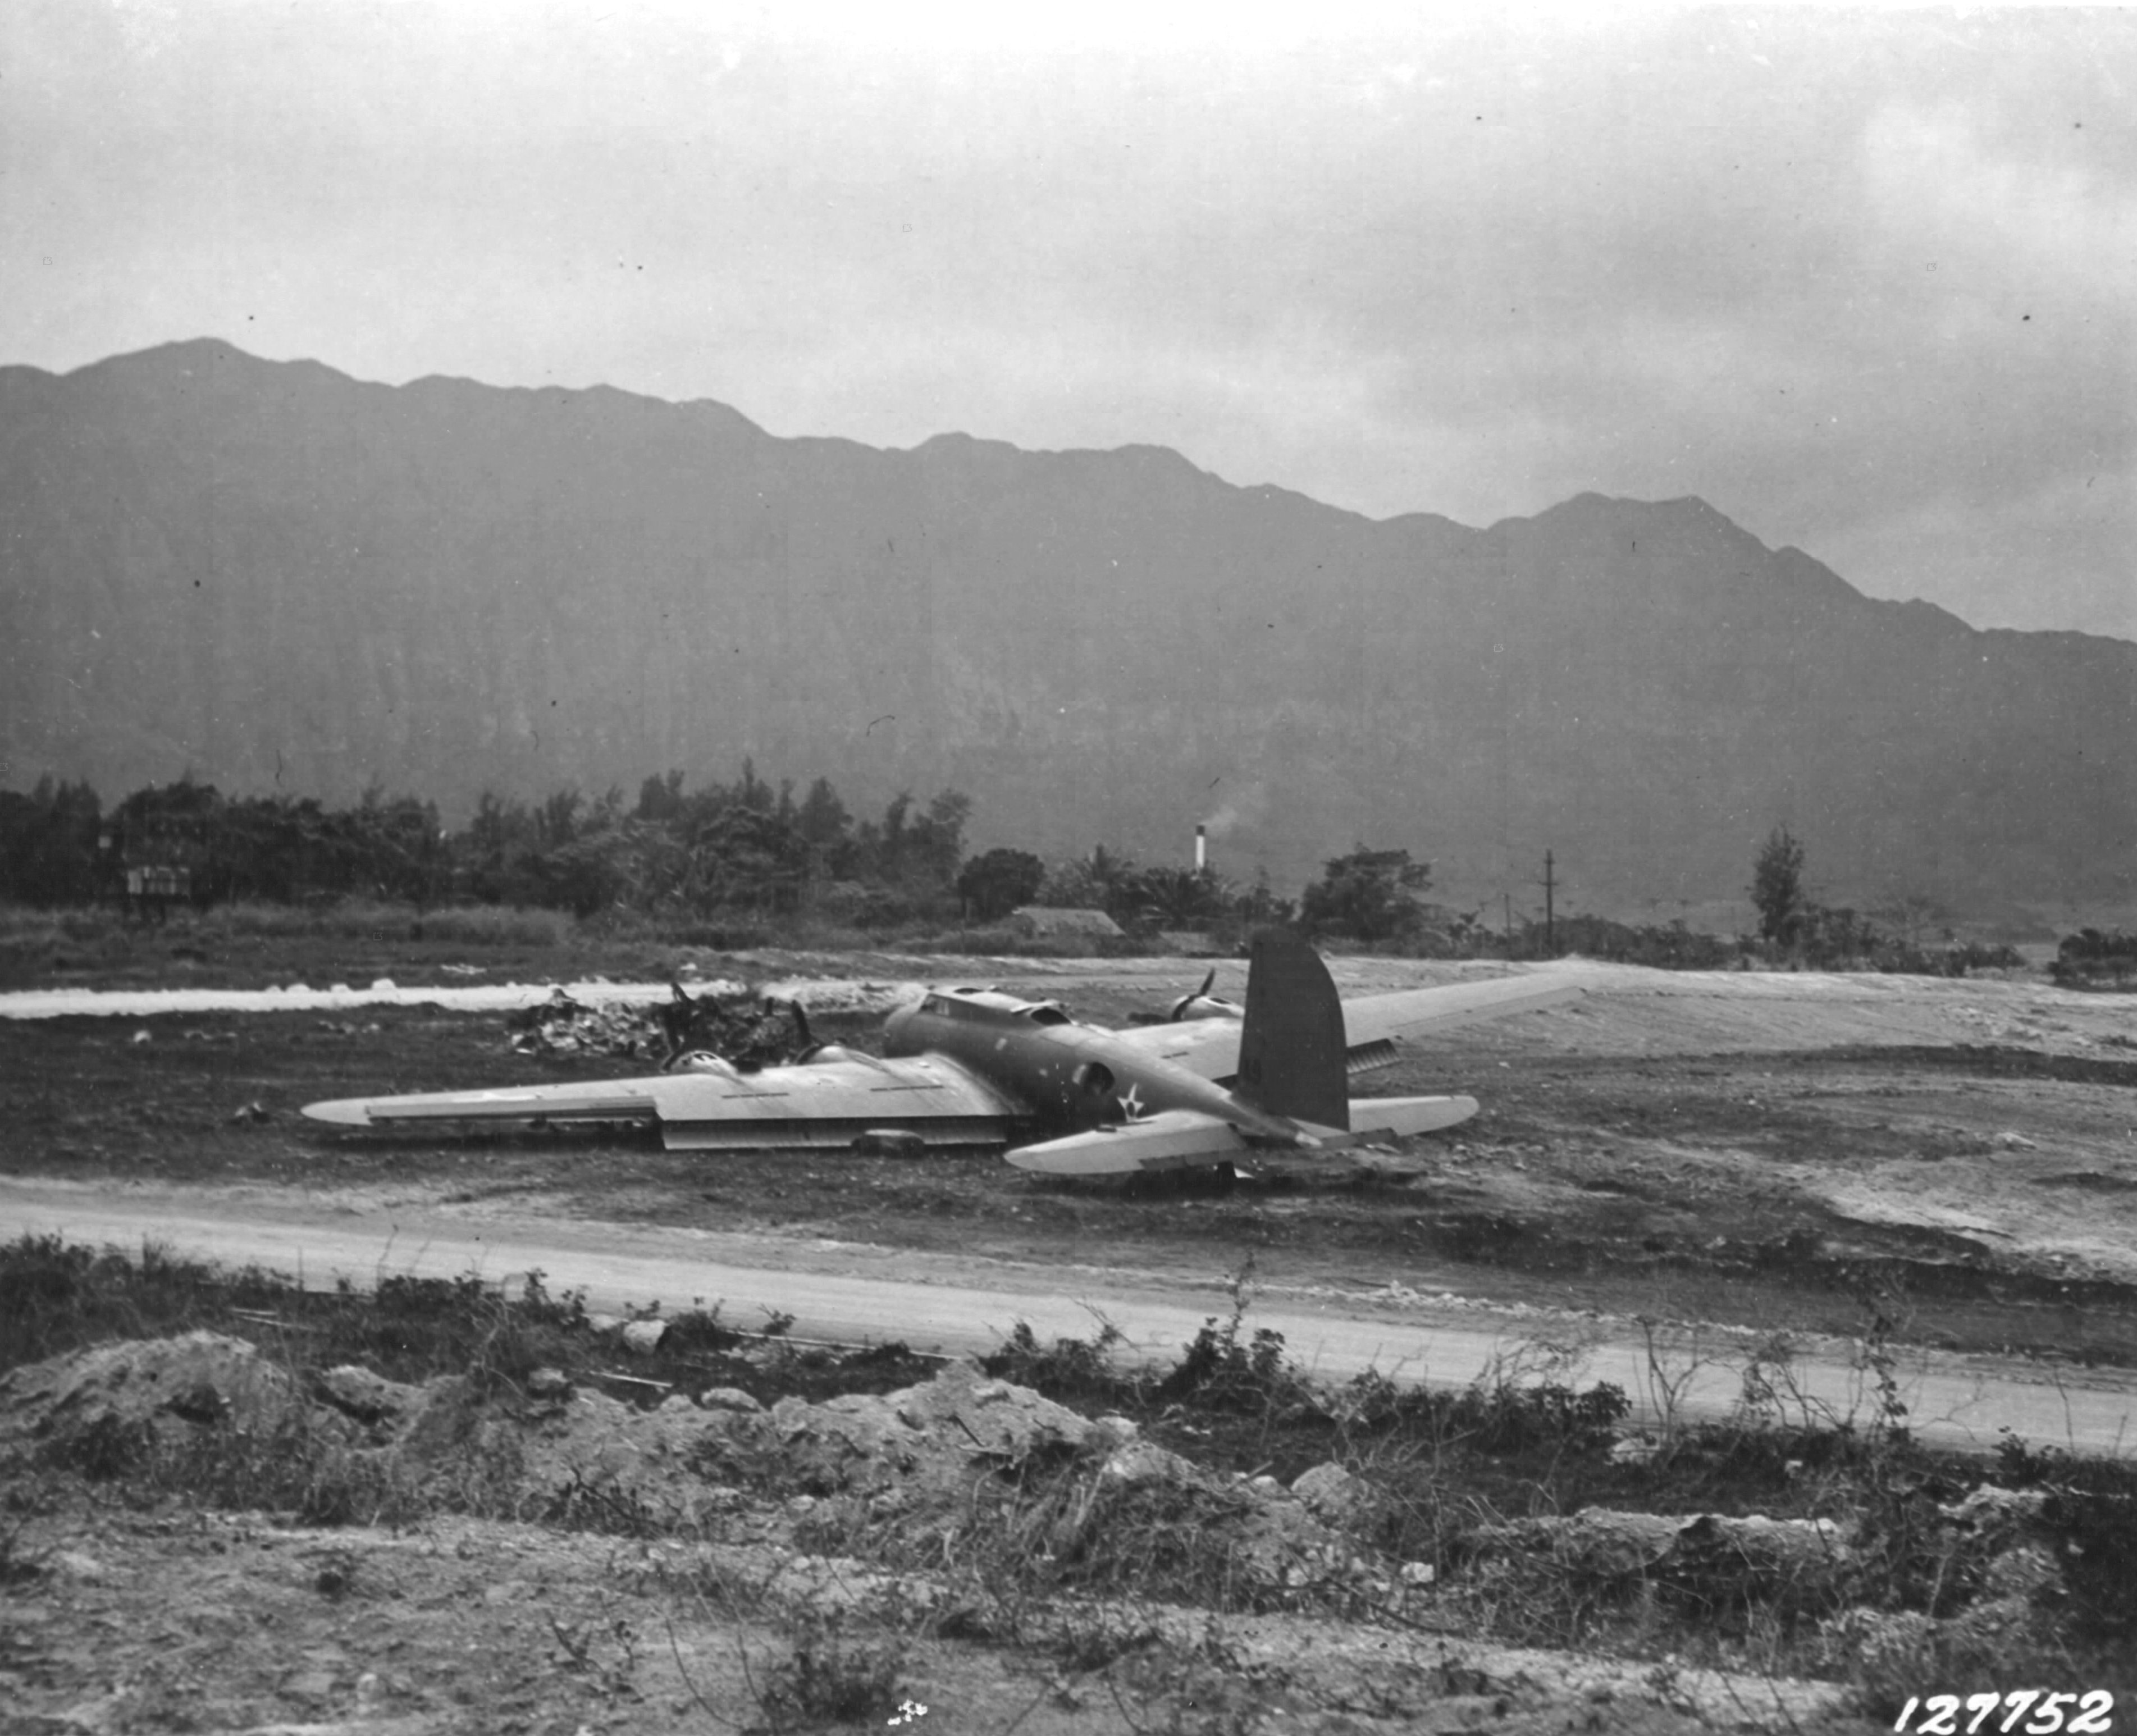 B-17C Flying Fortress bomber at Bellows Field, Oahu, US Territory of Hawaii, 8 Dec 1941; she was forced to belly-land on previous day during Japanese attack